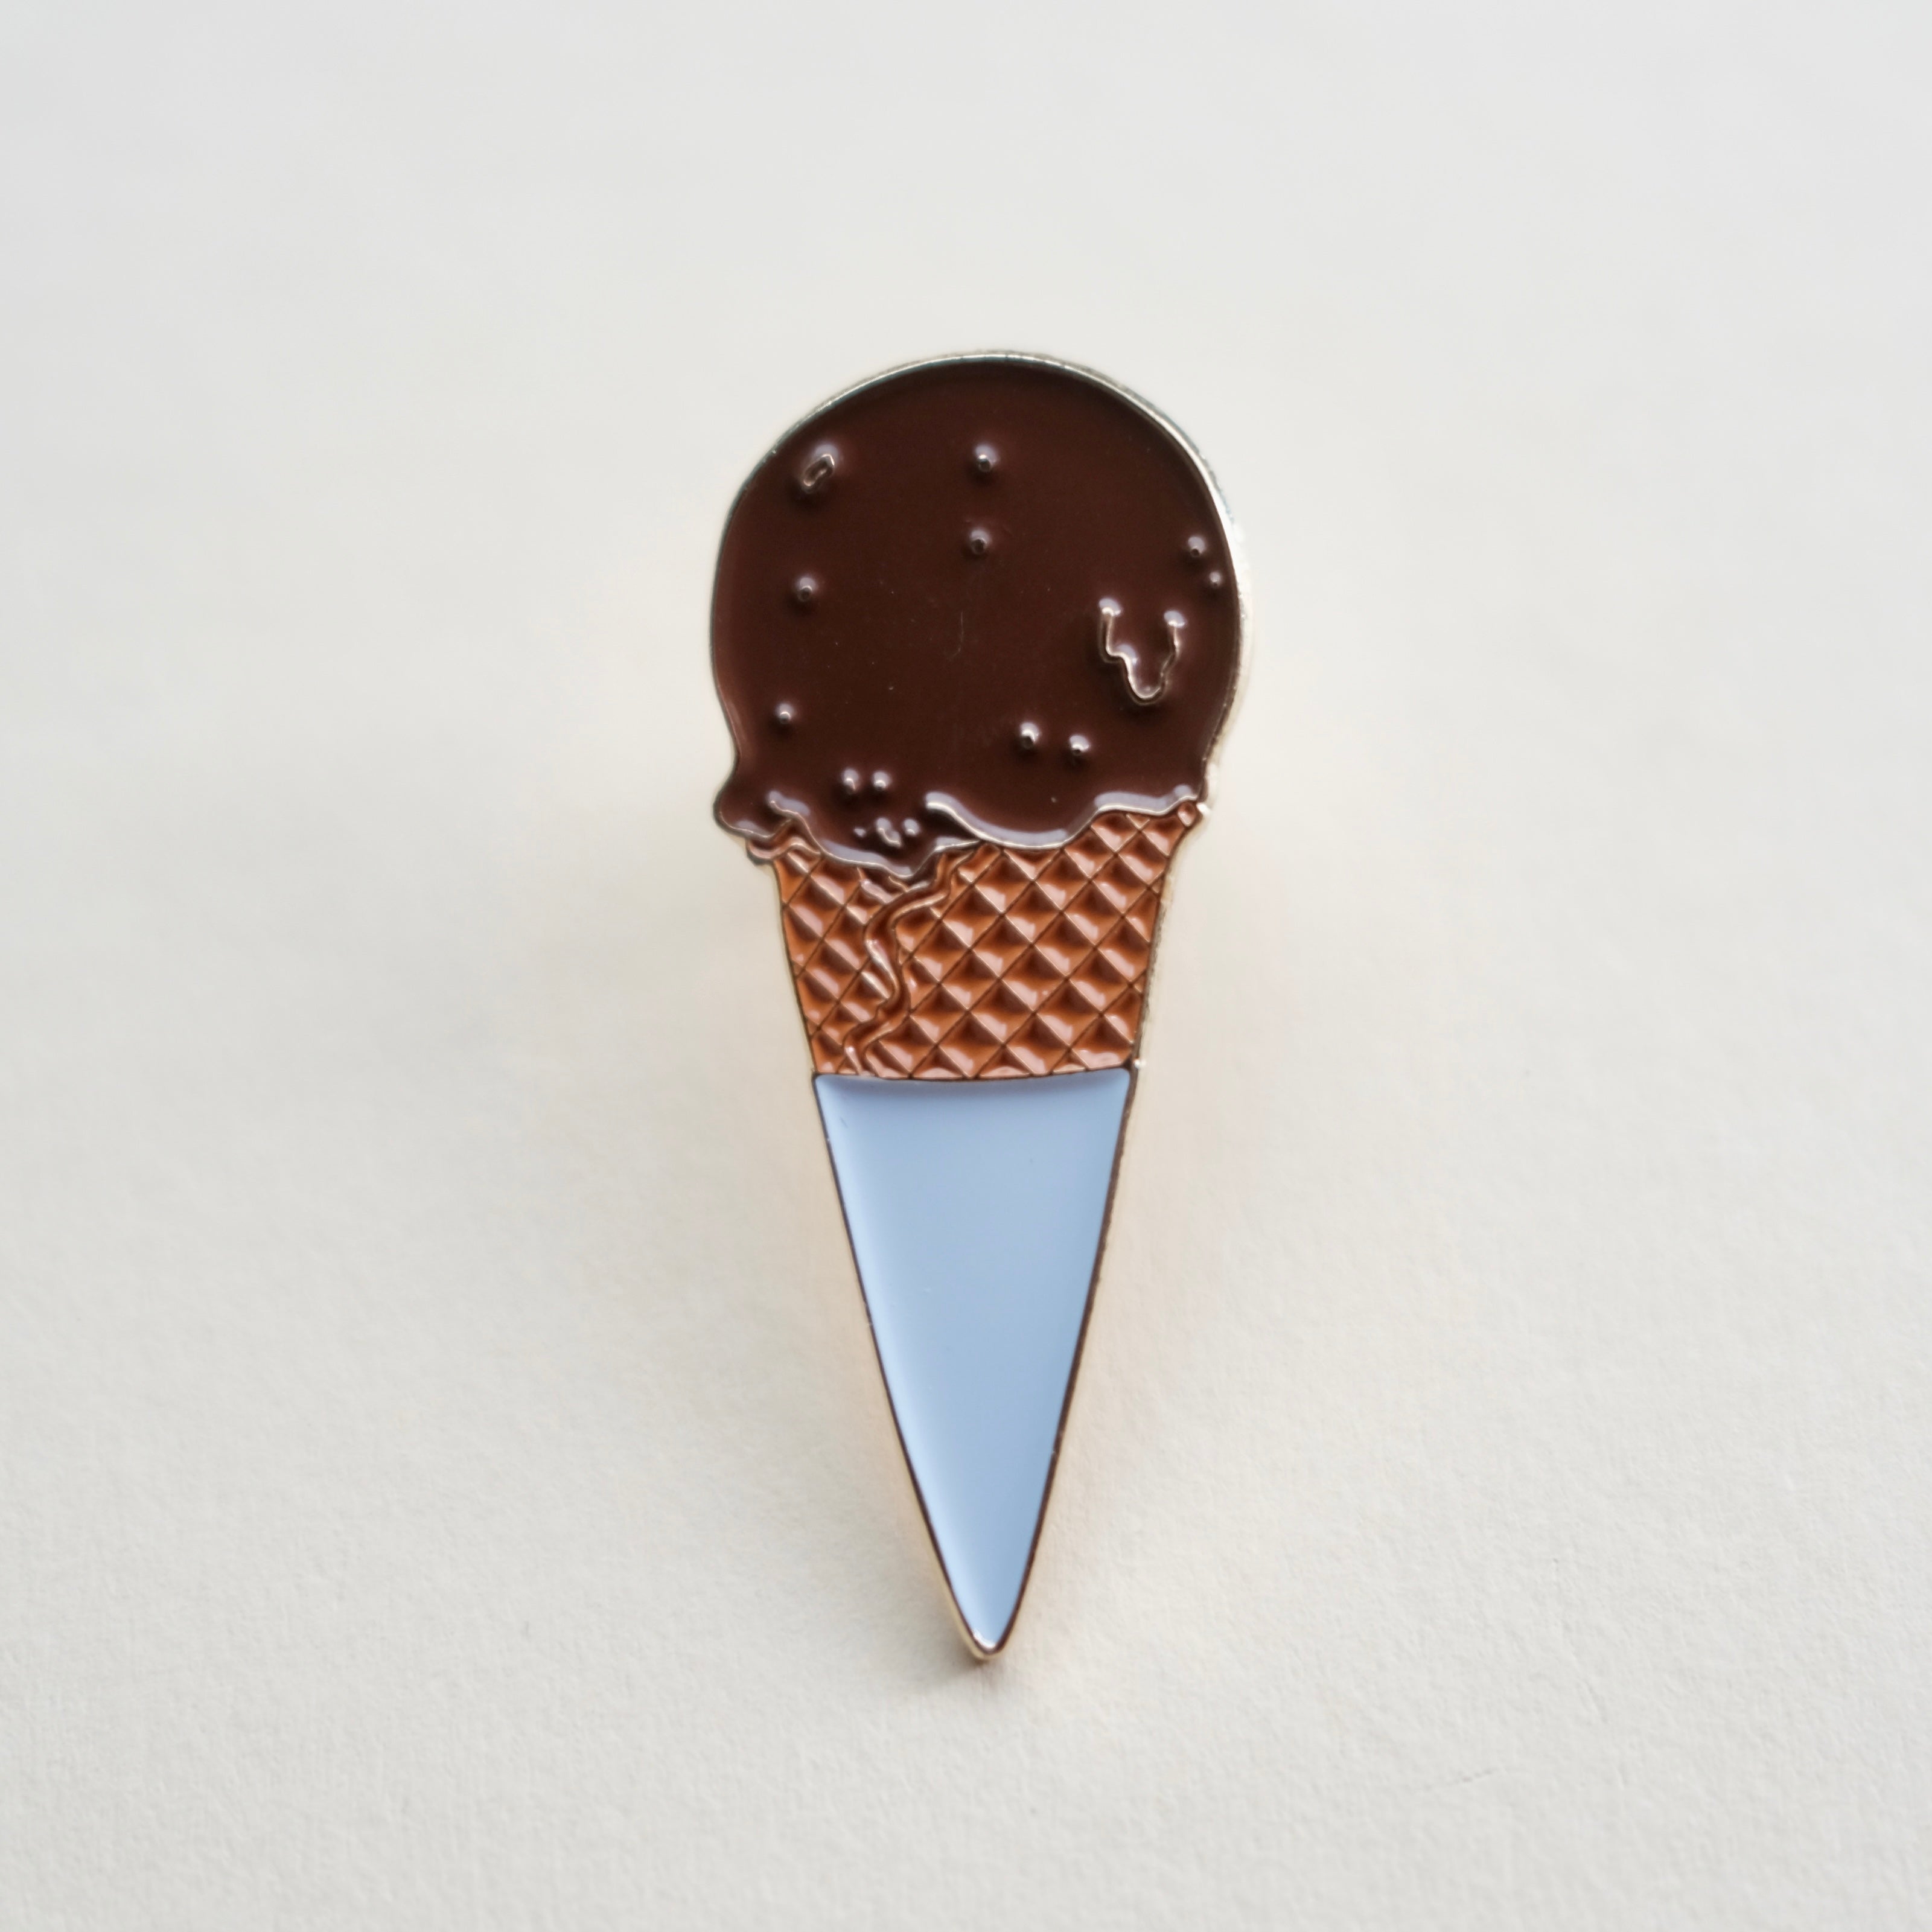 Embrace Timeless Indulgence with Our Chocolate Cone Pin!